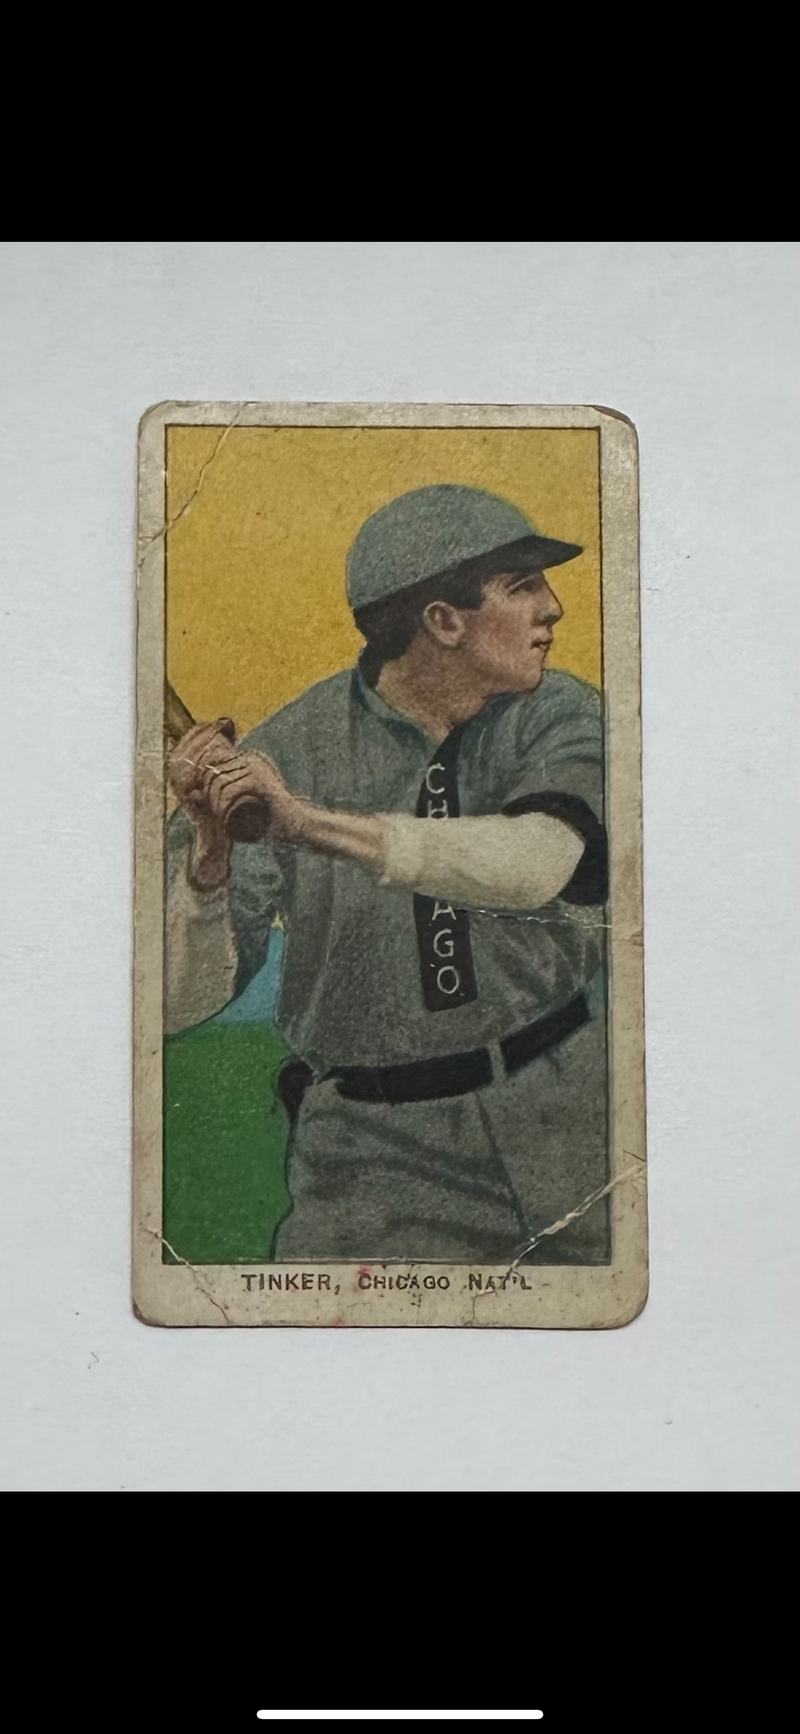 1909 T206 BASEBALL CIGARETTE CARDS "TINKER TO EVERS TO CHANCE"-$10K APR W COA!!! APR57